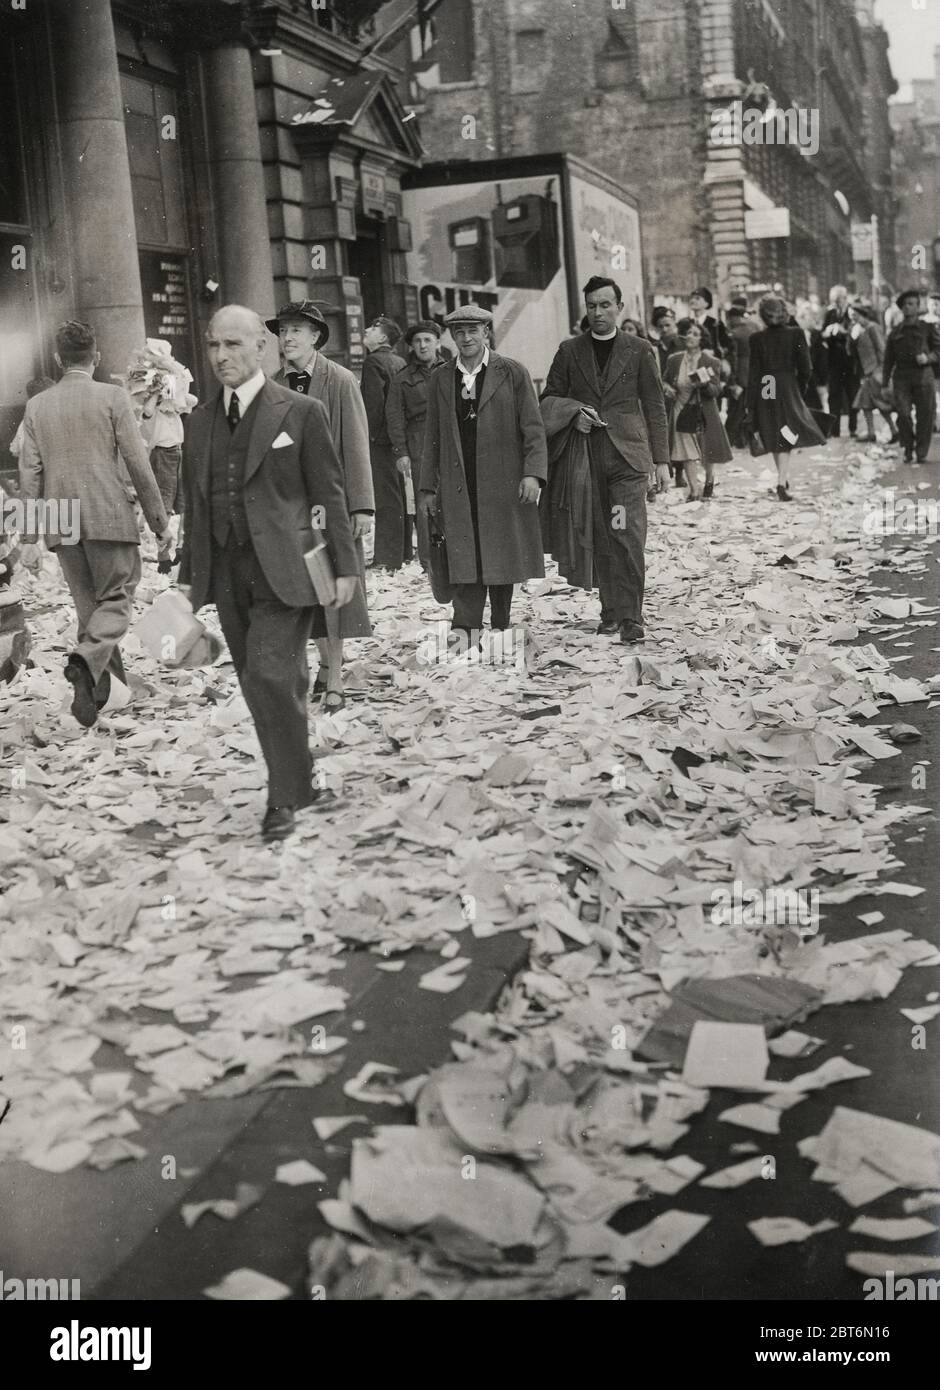 Vintage World War II photograph  - paper covering the pavements of central London following VJ Day celebrations, Japanese surrender. Stock Photo